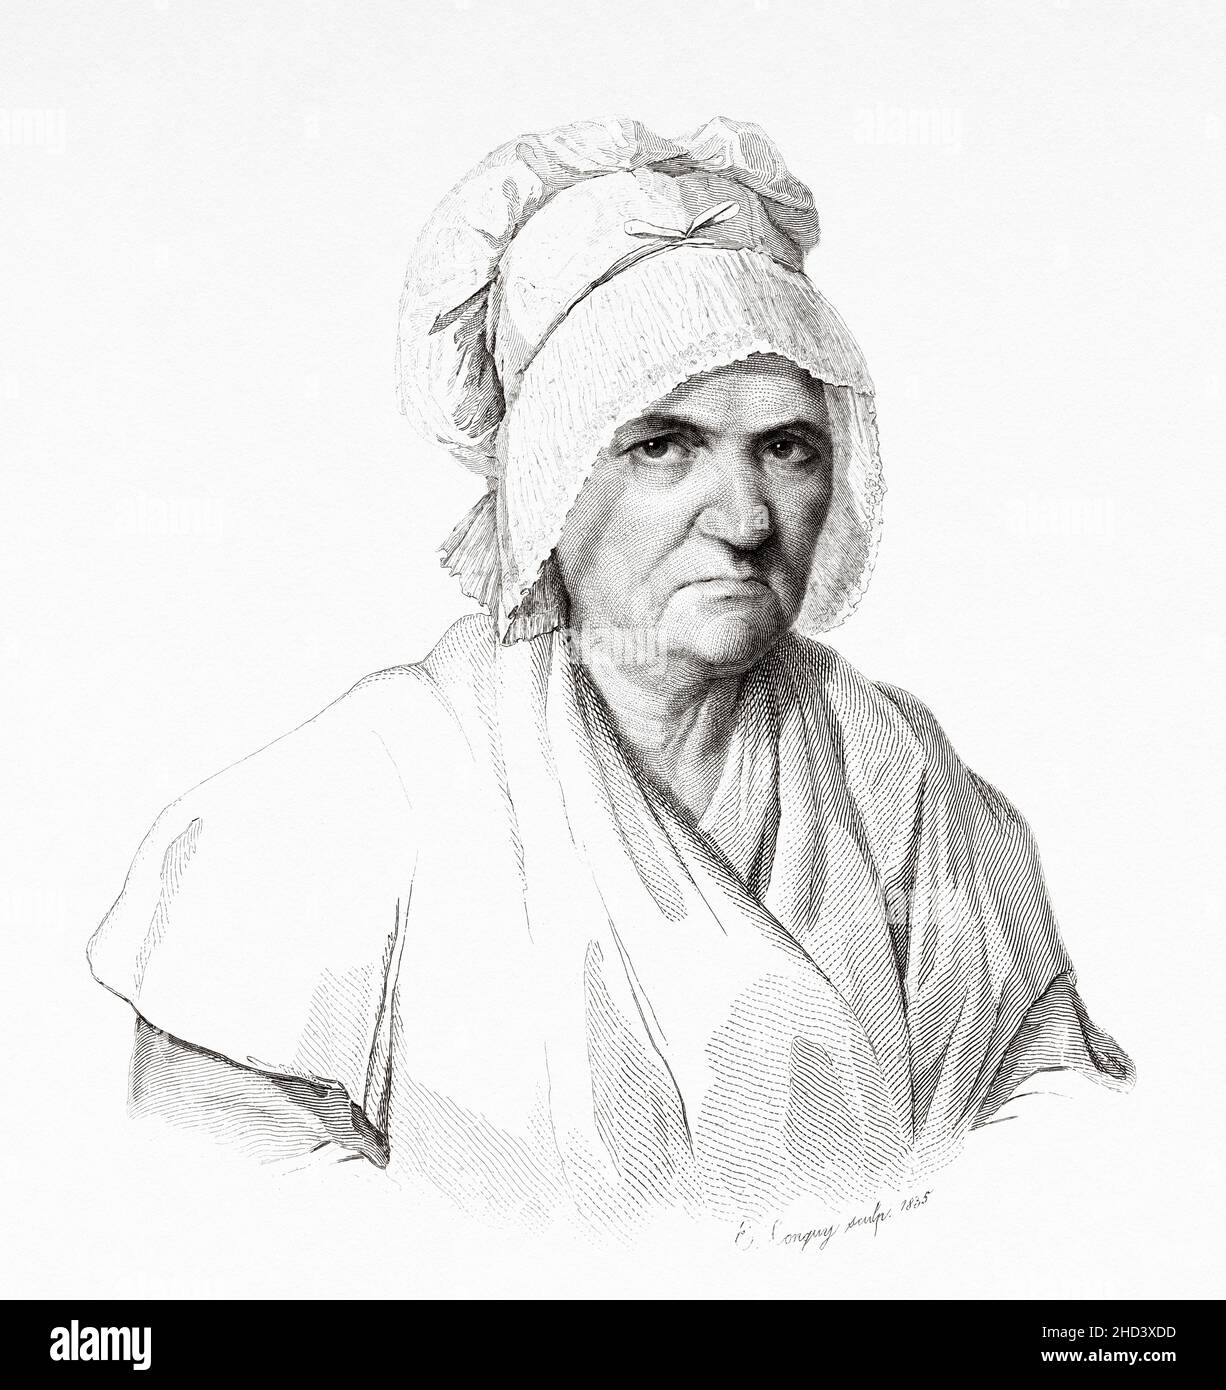 Madame Deinsac. Benefactor French woman in Toulon. France. Europe. Old 19th century engraved illustration from Portraits et histoire des hommes utile by Societe Montyon et Franklin 1837 Stock Photo